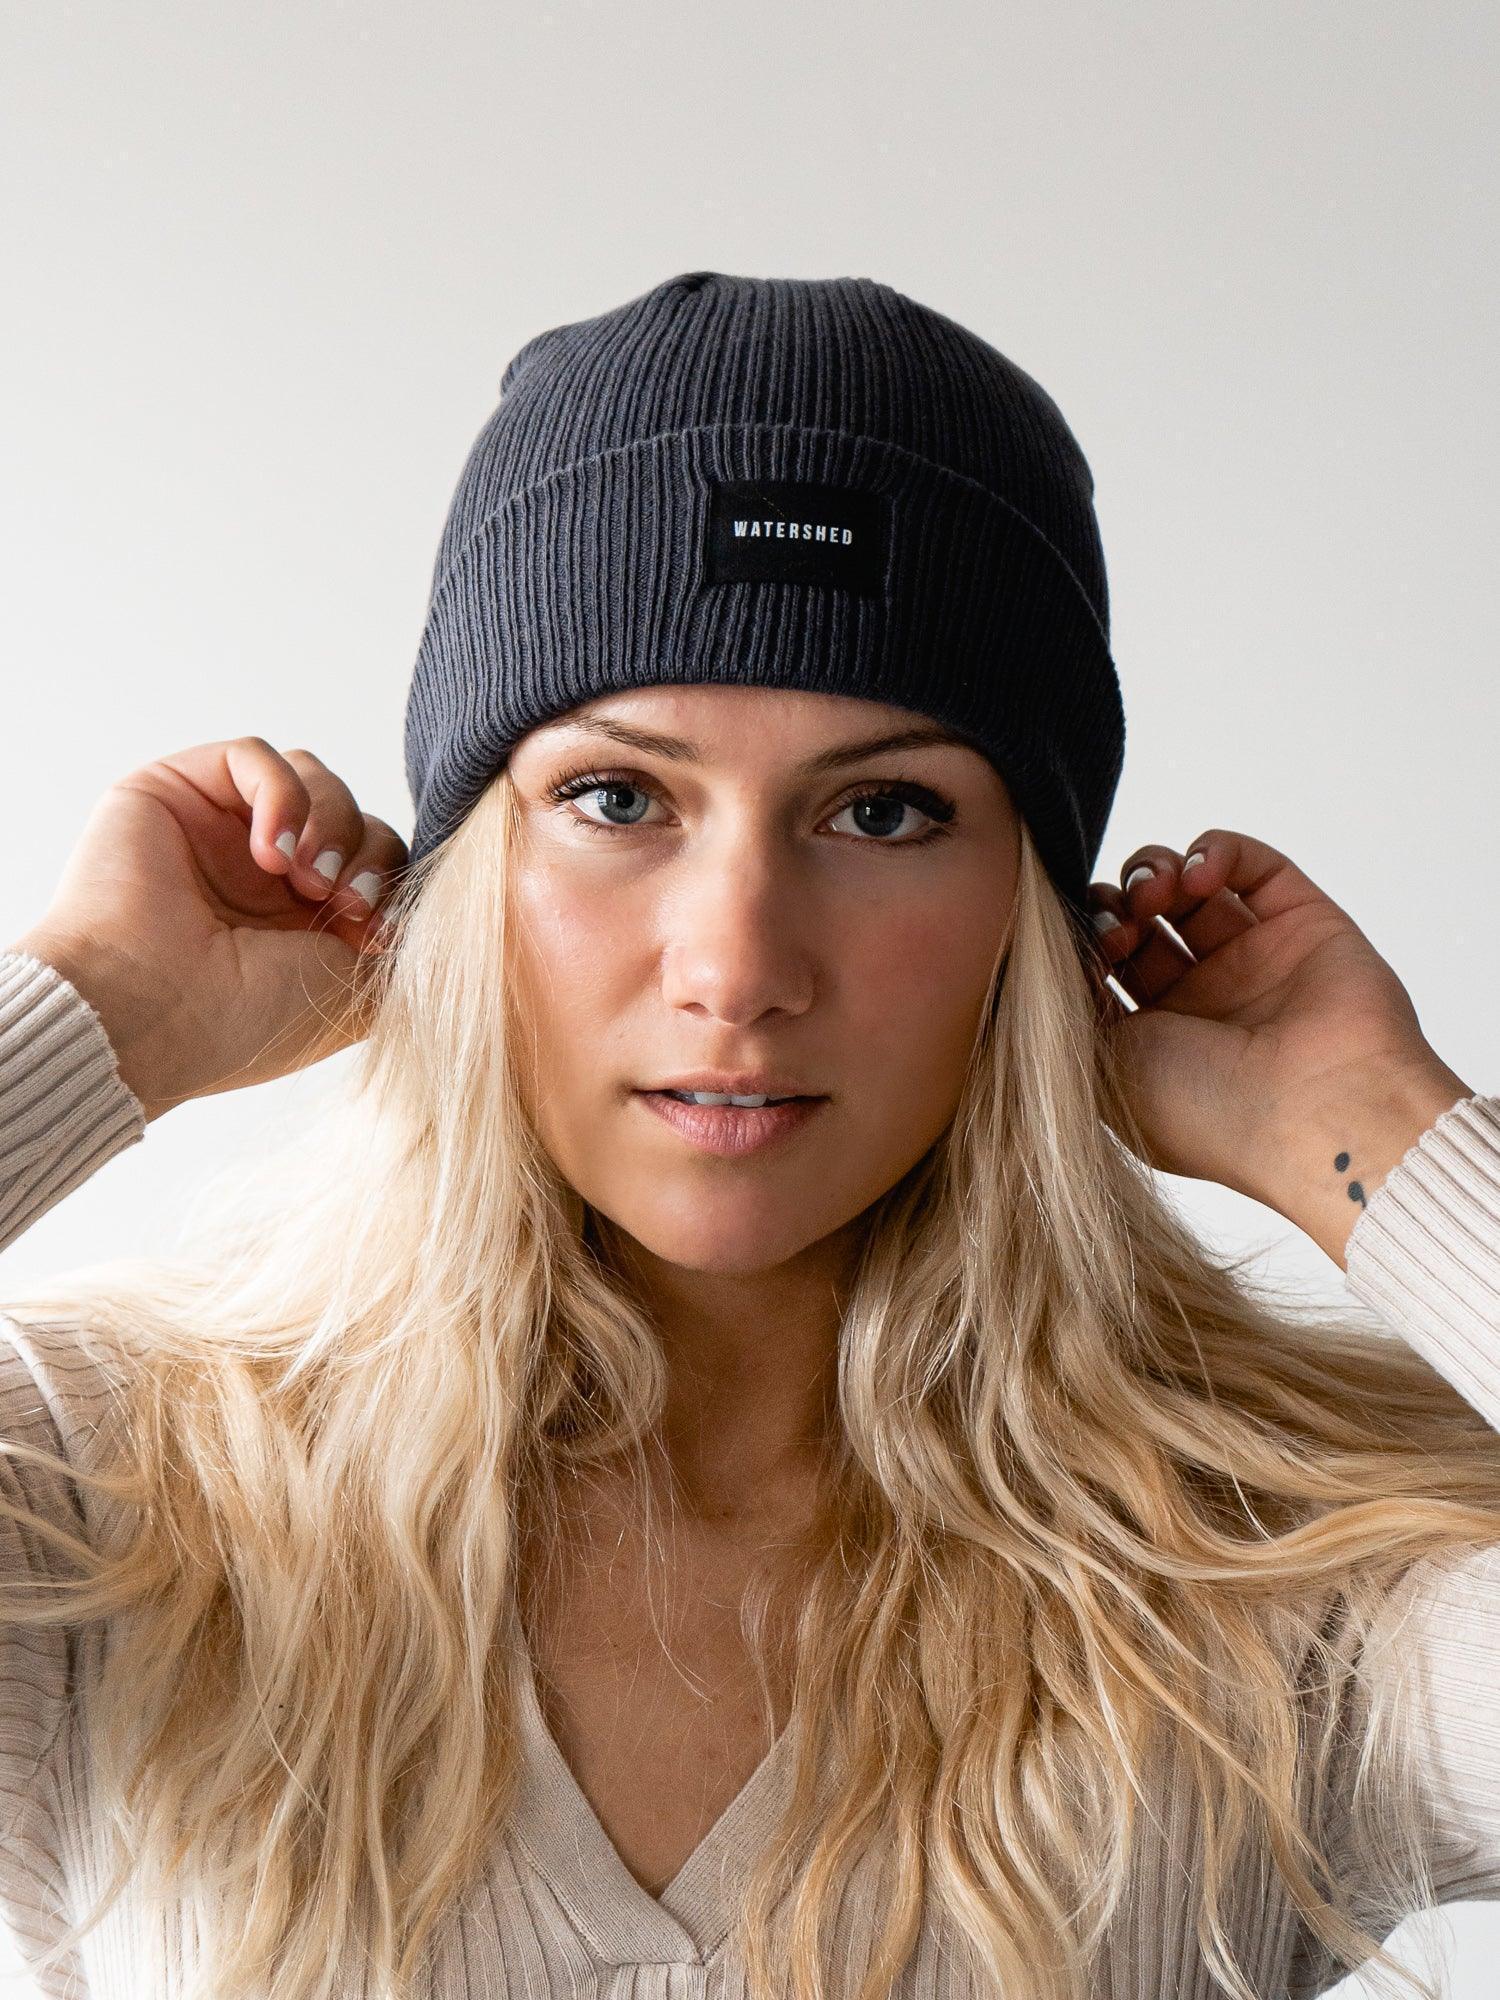 Charcoal Organic Cotton Beanie - Stay warm and eco-conscious with our sustainable charcoal-colored beanie, crafted from organic cotton for a stylish and cozy winter essential.